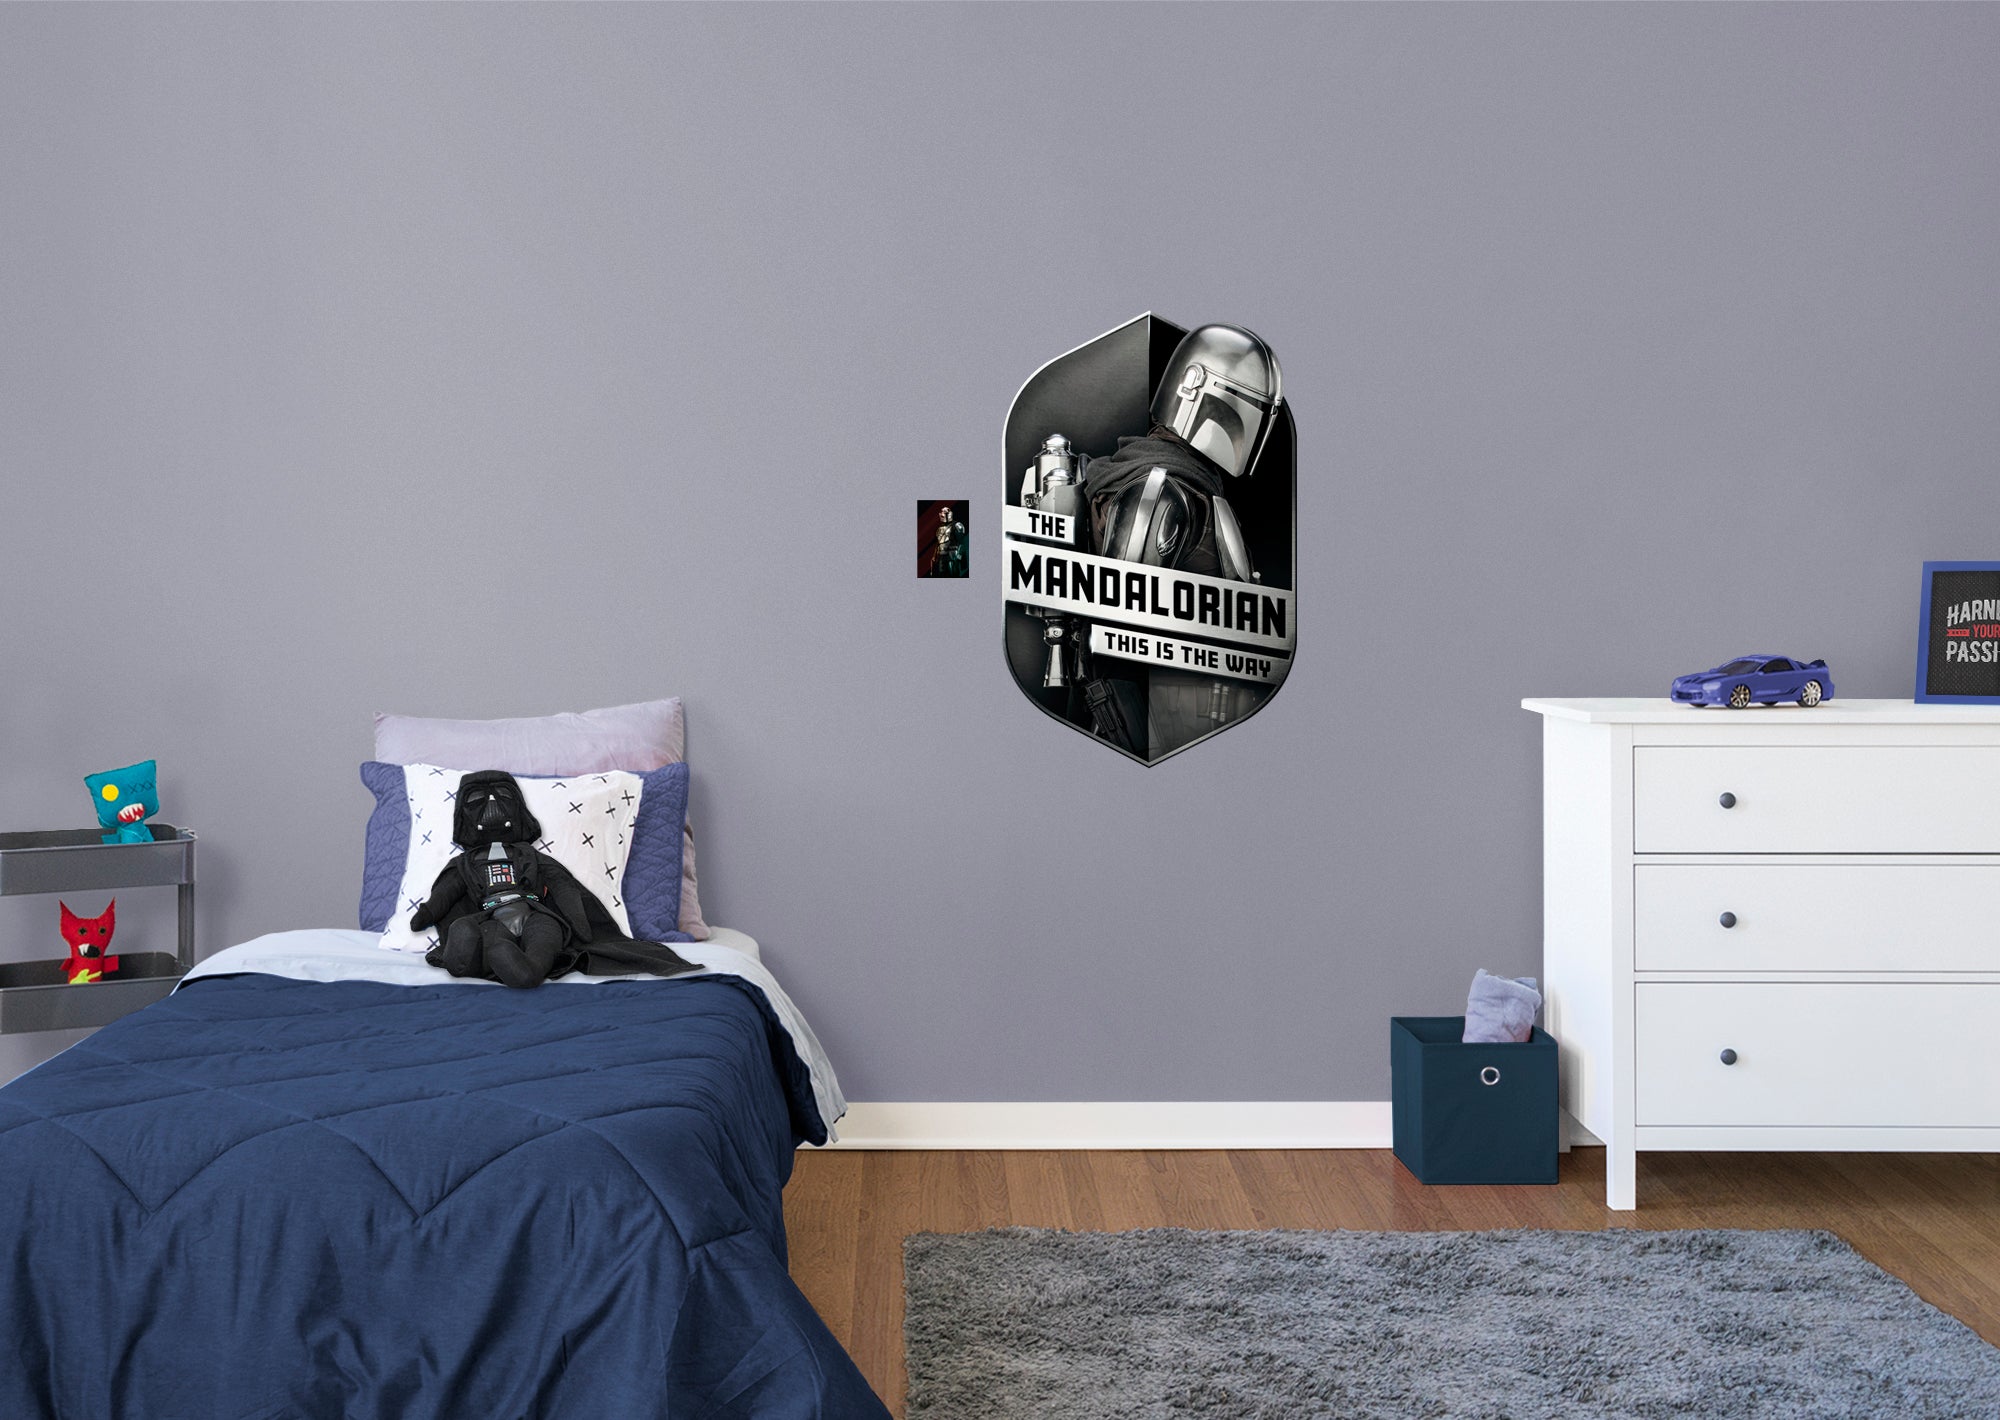 The Mandalorian Shield - Officially Licensed Star Wars Removable Wall Decal XL by Fathead | Vinyl